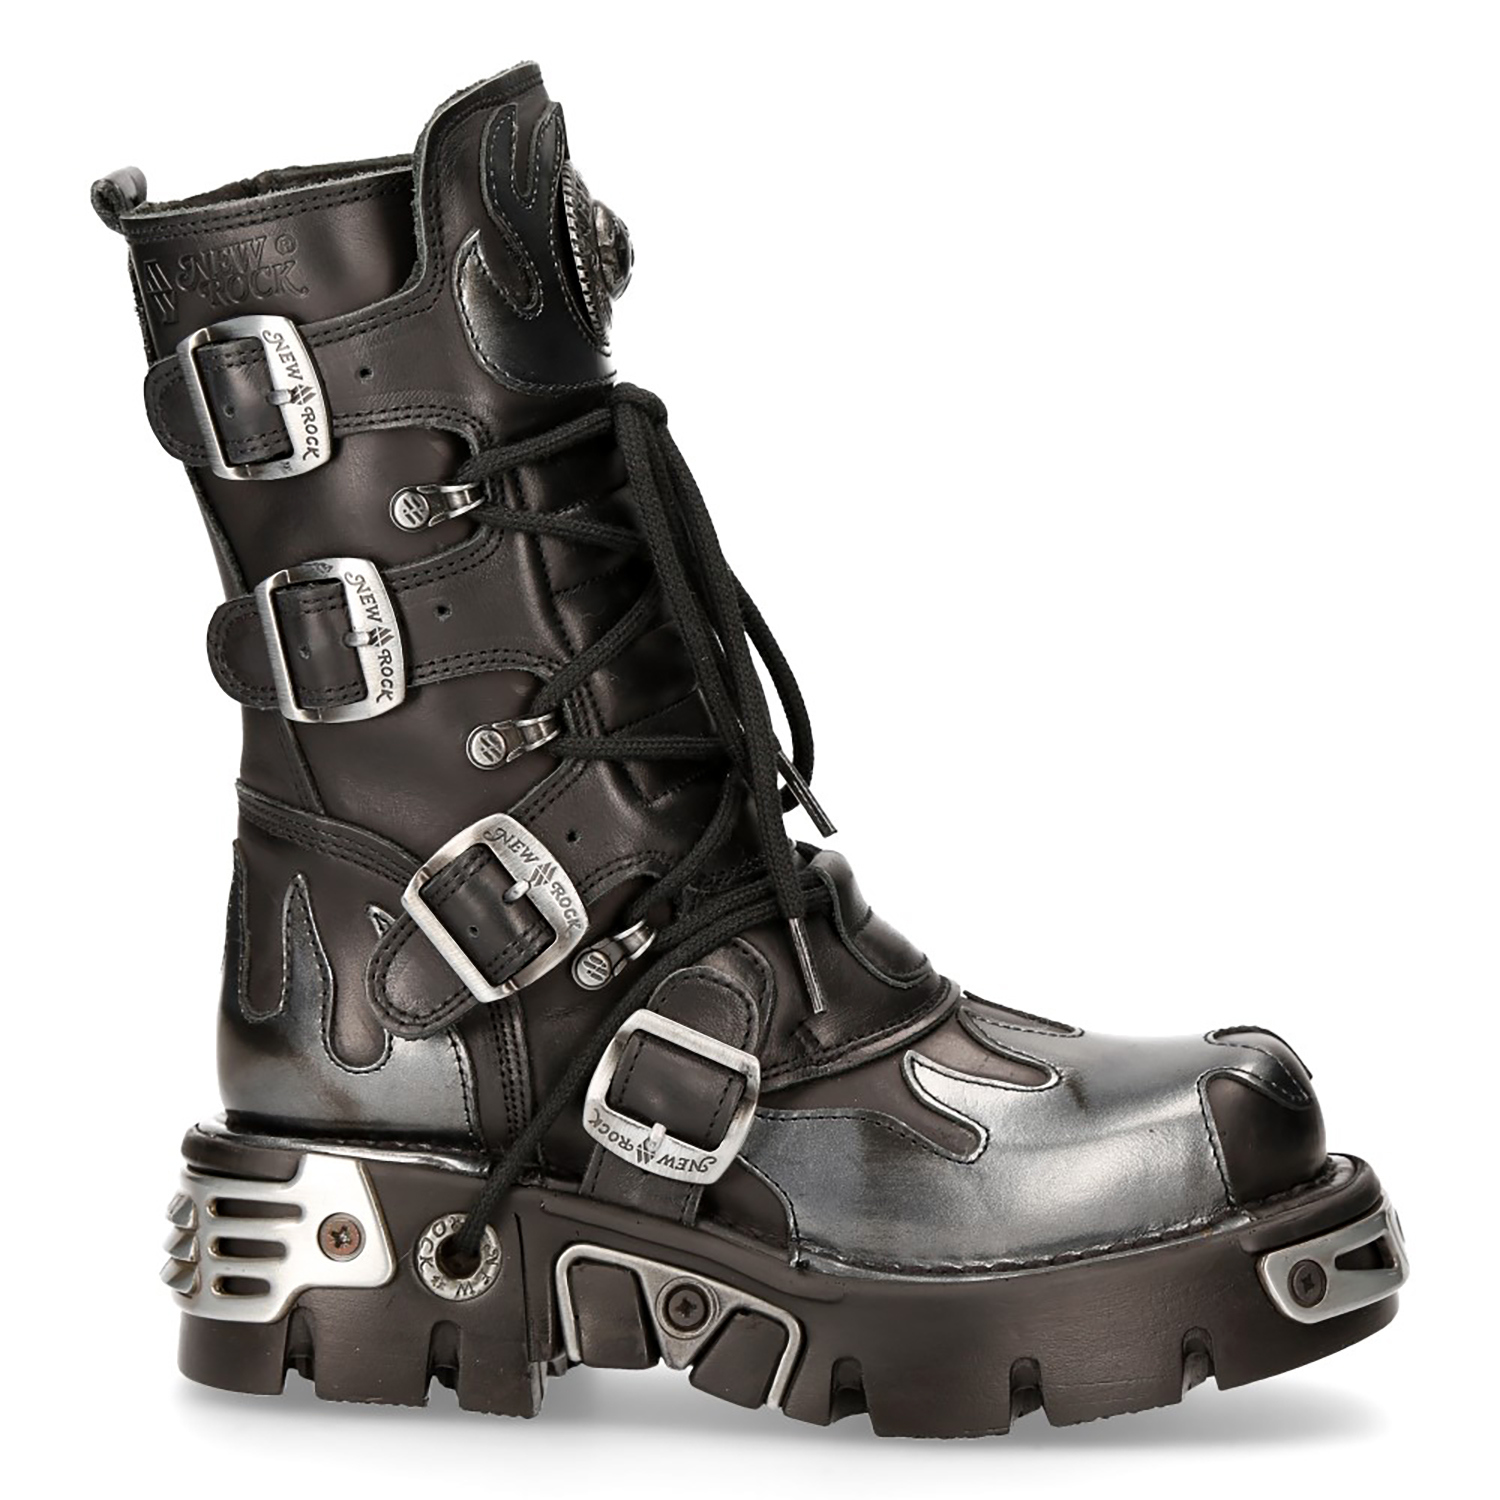 Black Itali and Silver Pulik Leather New Rock Metallic Boots M.591